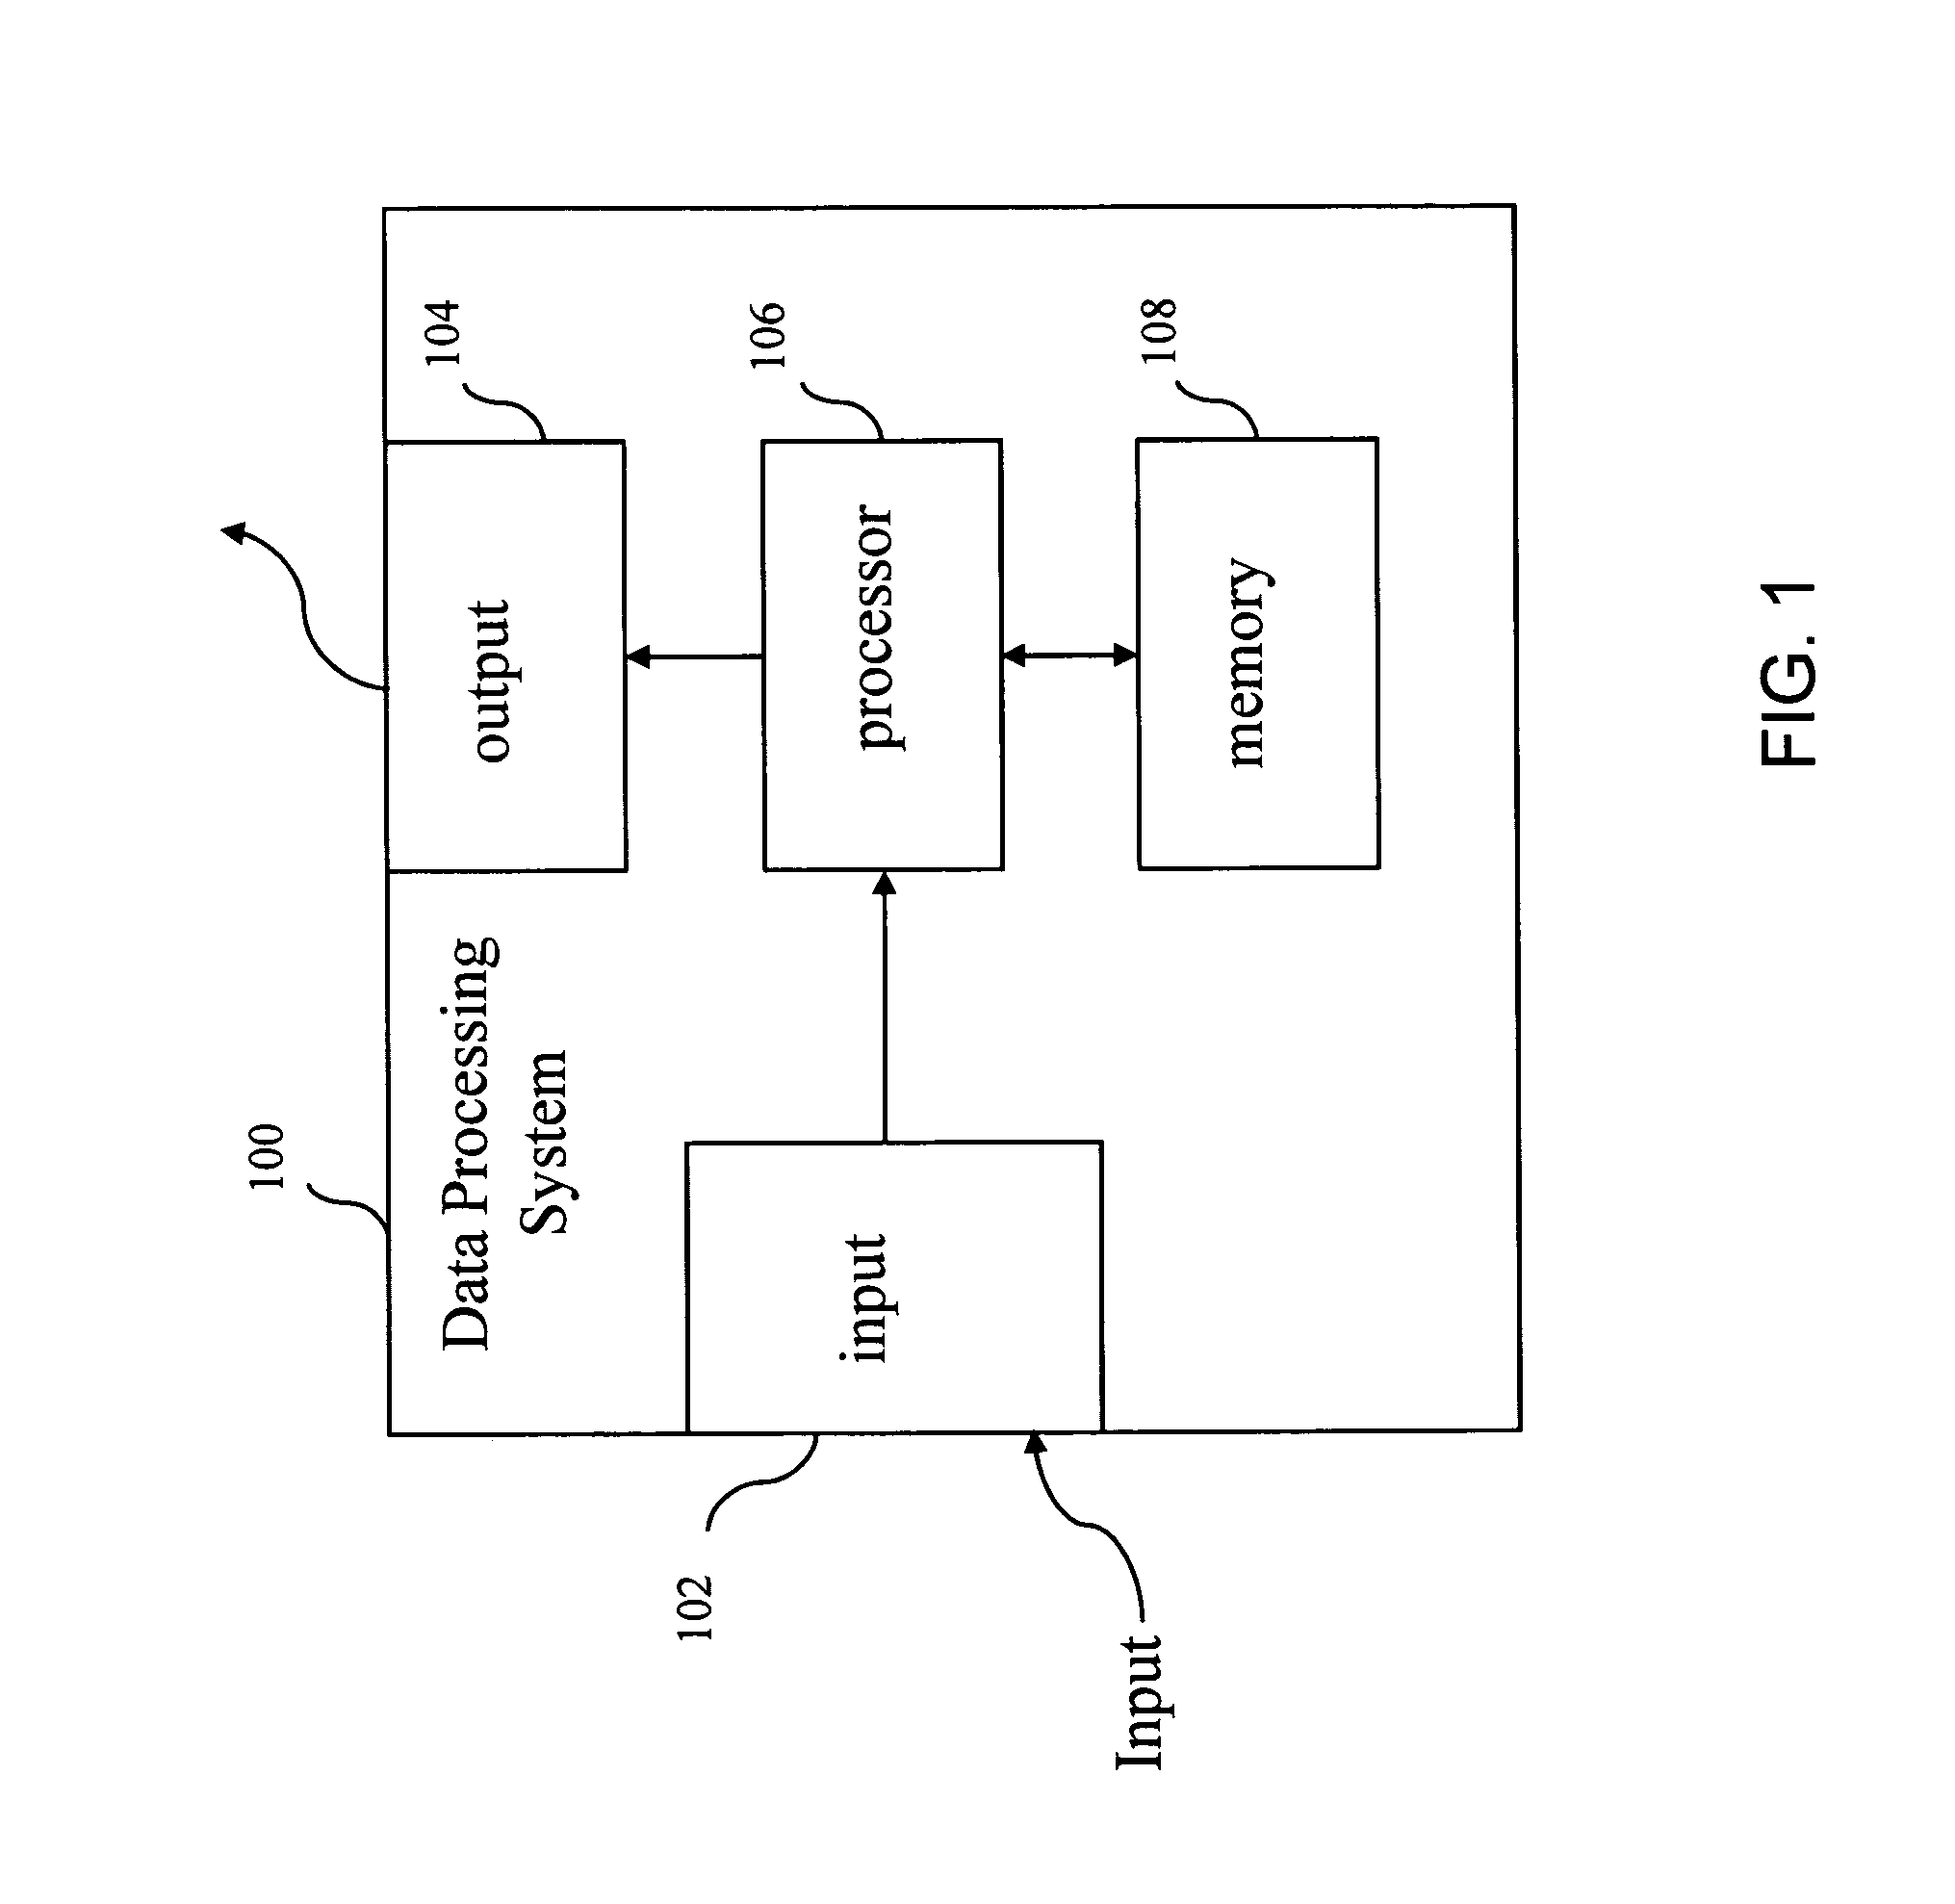 Visual attention and object recognition system